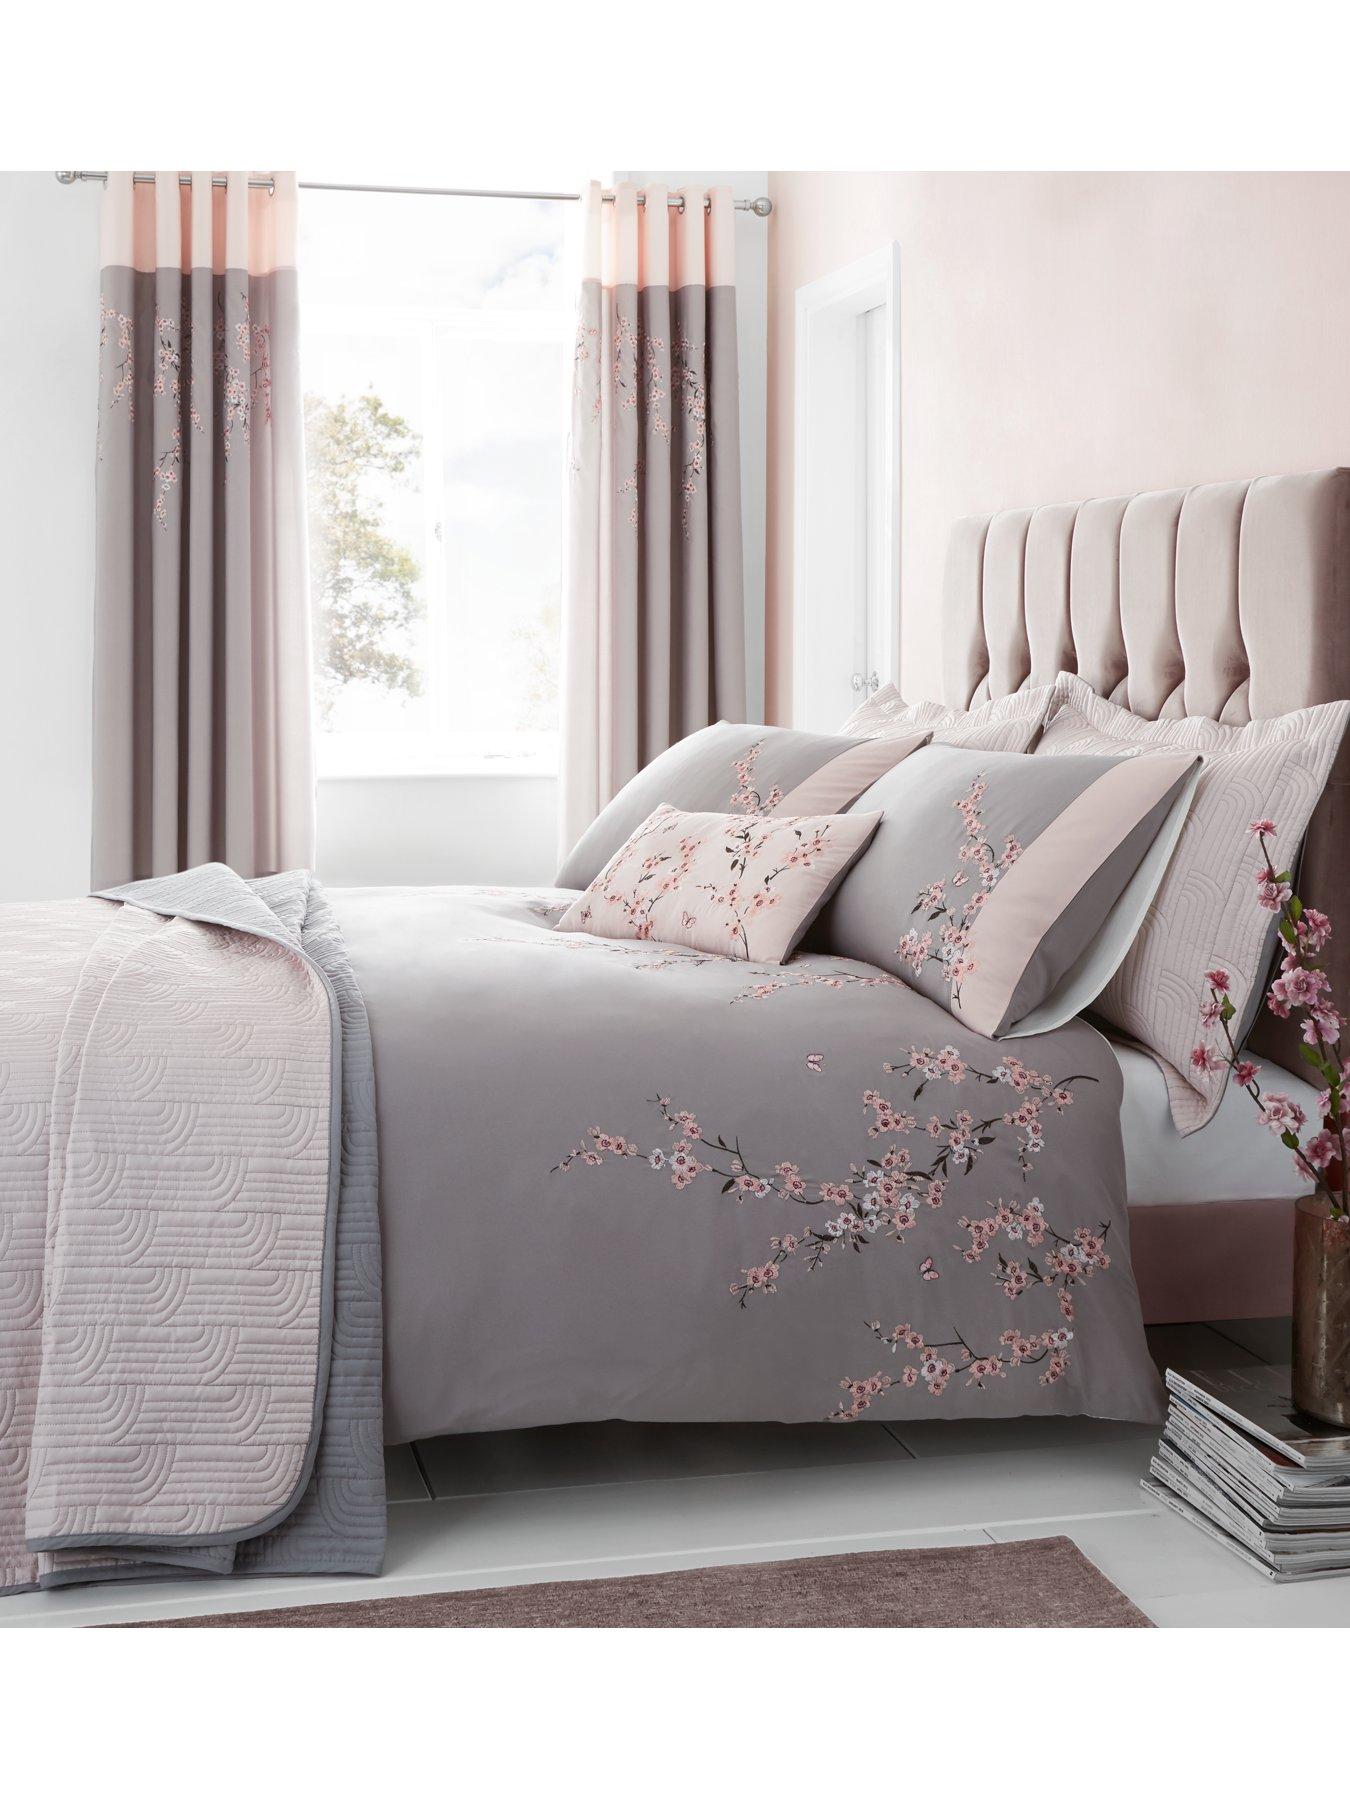 Catherine Lansfield Embroidered Blossom Duvet Cover Set